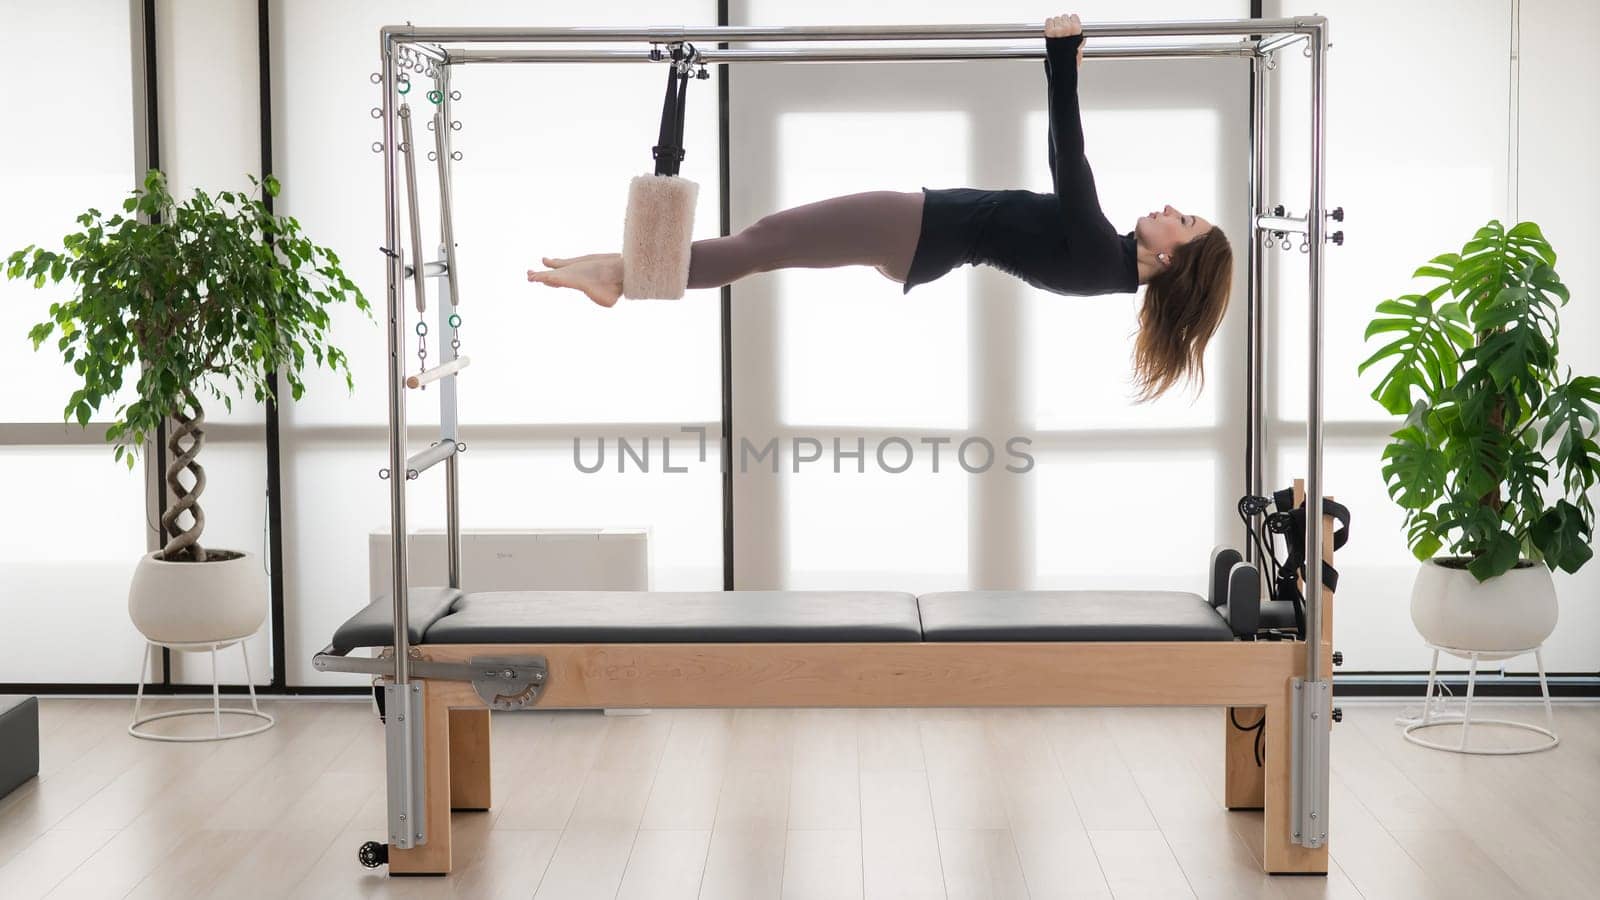 Caucasian woman doing aerial exercises on a reformer machine